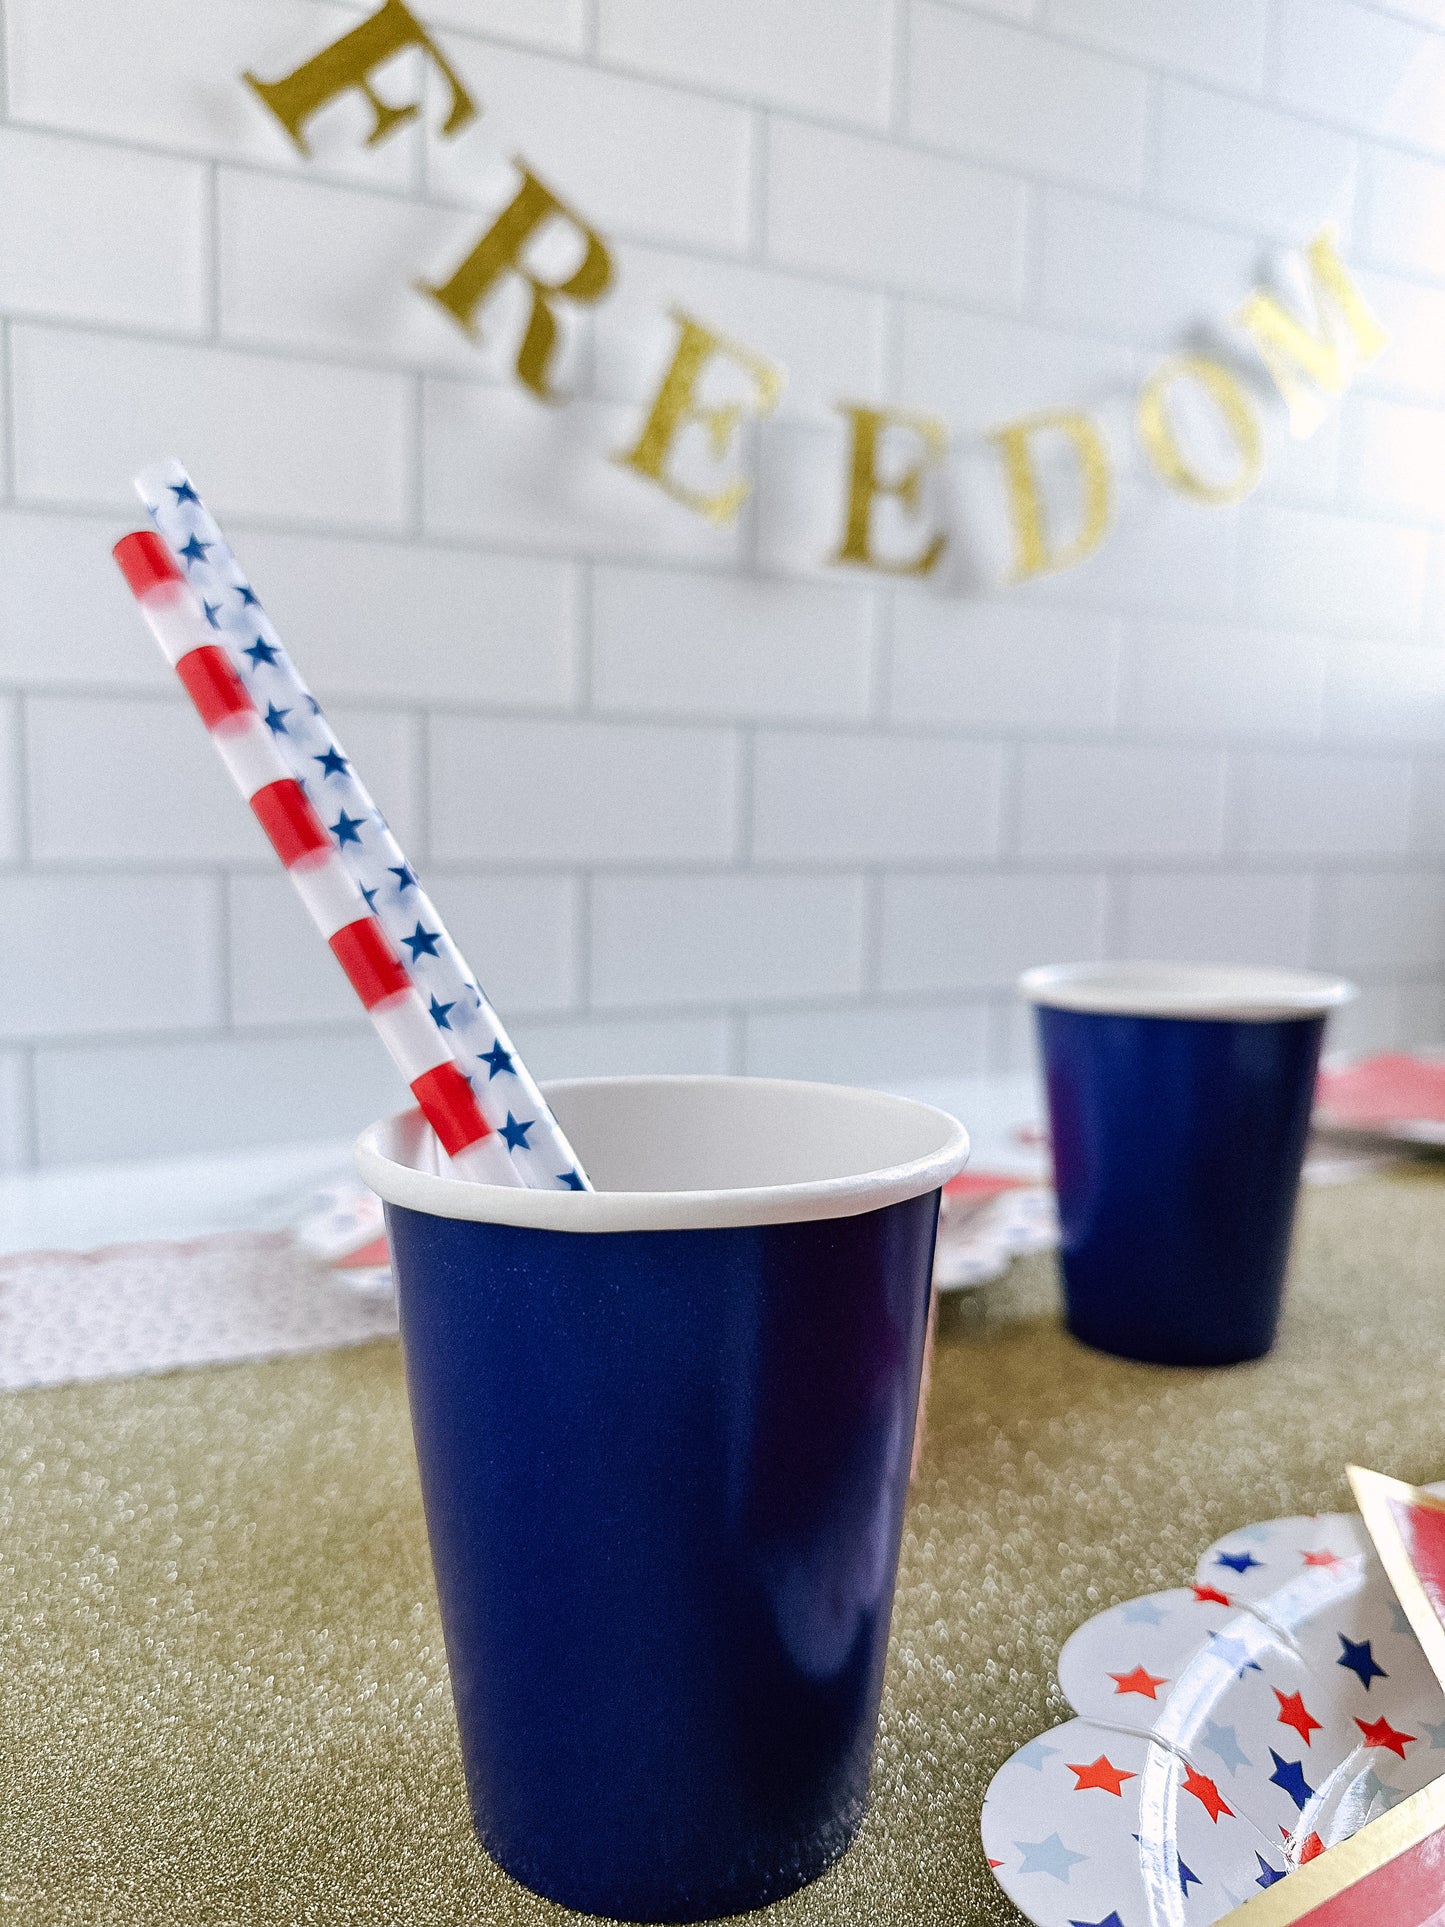 Star Spangled Party Box | 4th of July Themed Party Box